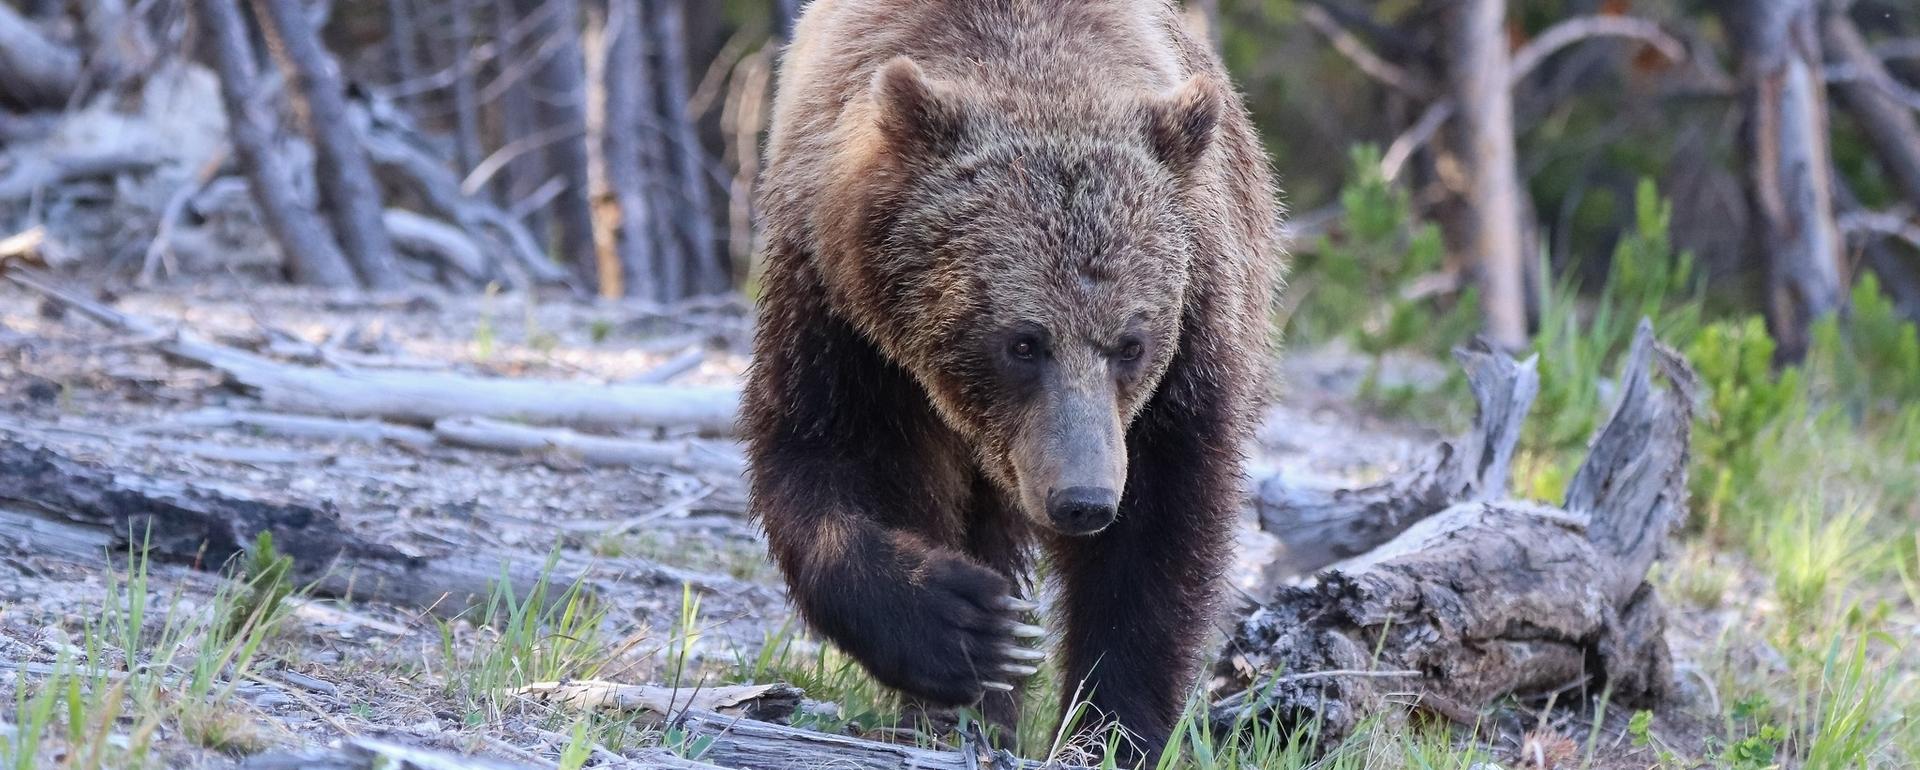 A grizzly bear near Roaring Mountain, Yellowstone National Park